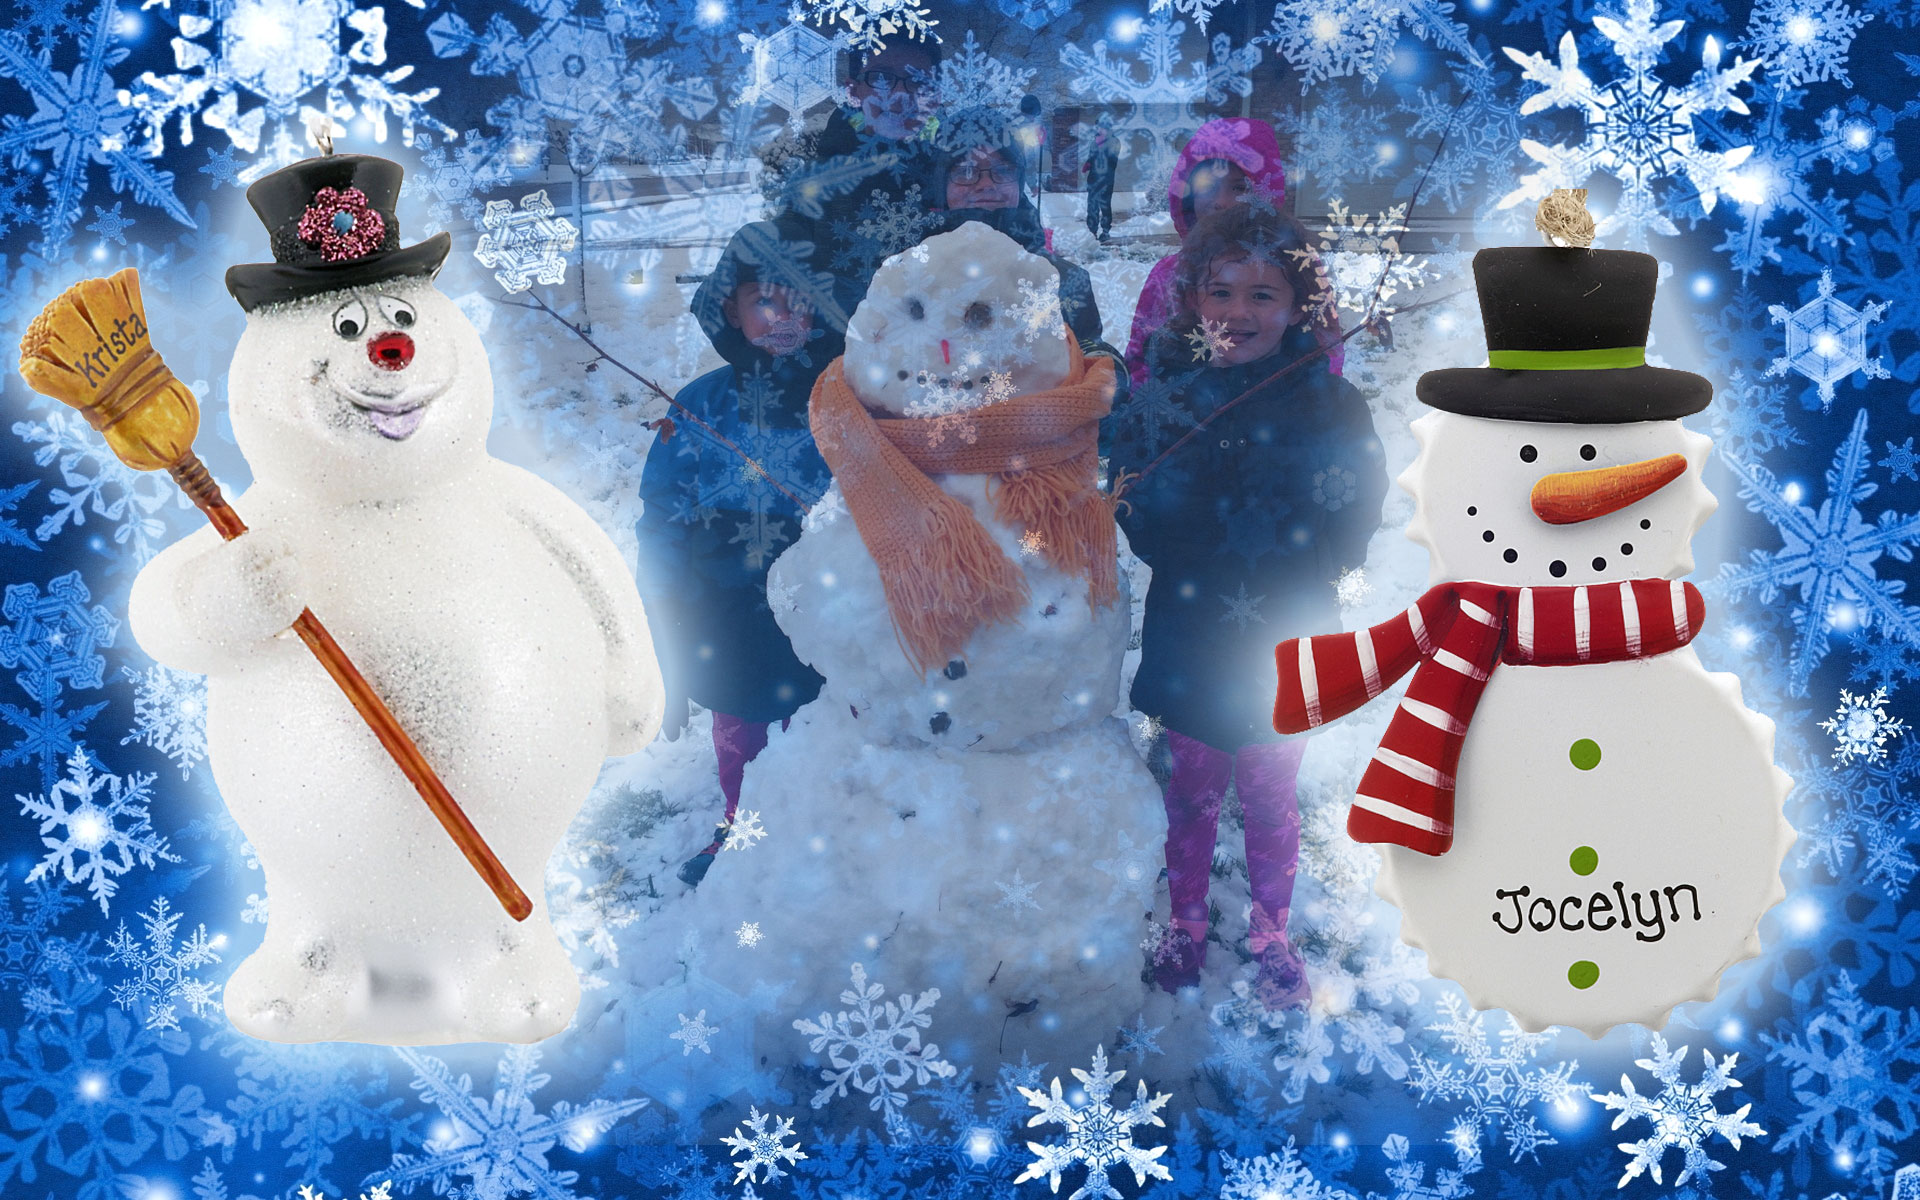 Two snowmen ornaments side by side to represent how to build Frosty the Snowman or the classic carrot-nosed snowman. | OrnamentShop.com